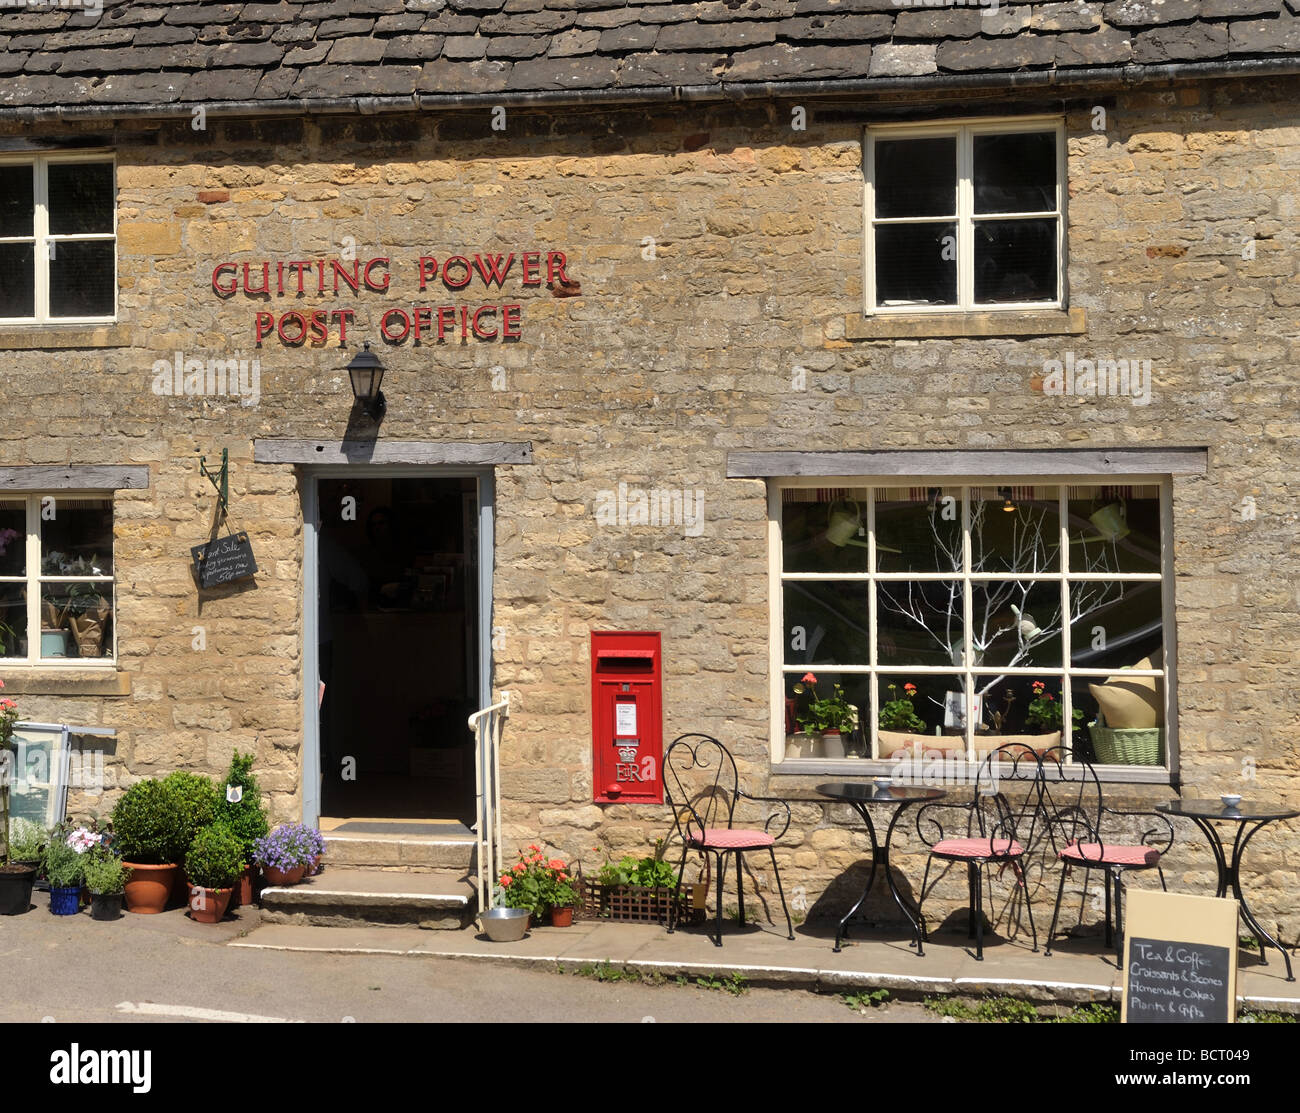 Postamt Guiting Power, Guiting Power, Gloucestershire, Cotswolds, England, UK. Stockfoto